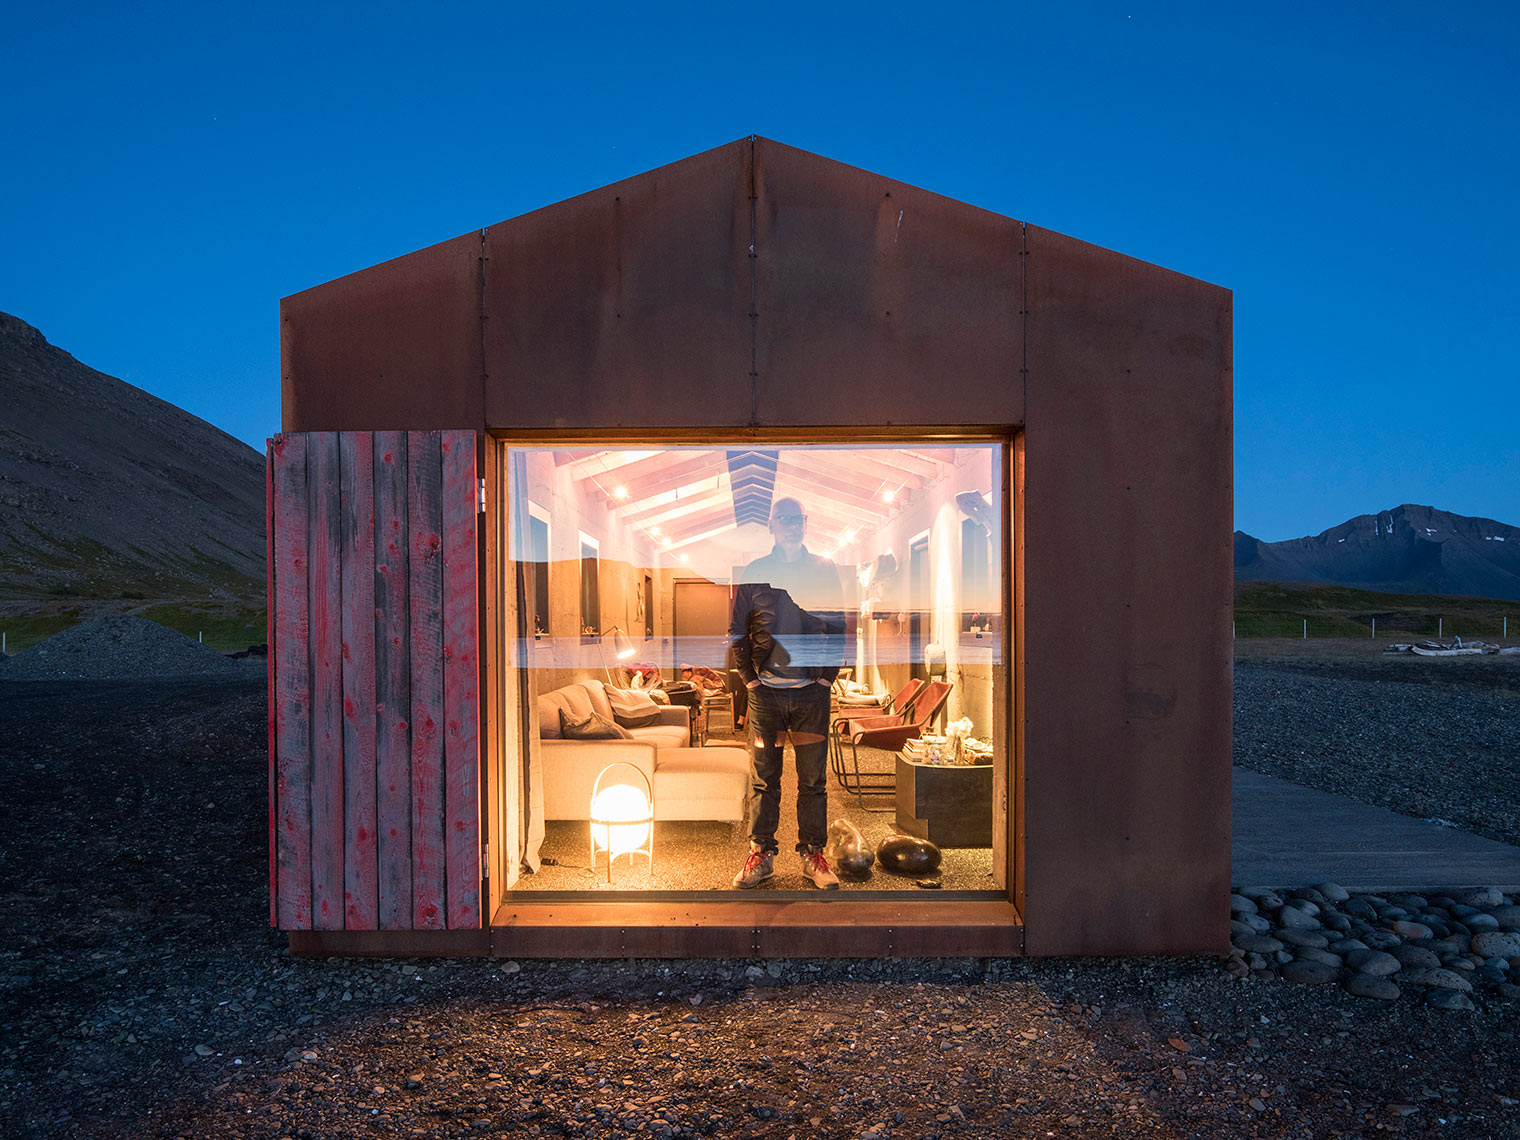 PK ARKITEKTAR | Concrete Factory Turned Into A Vacation Cabin - Iceland